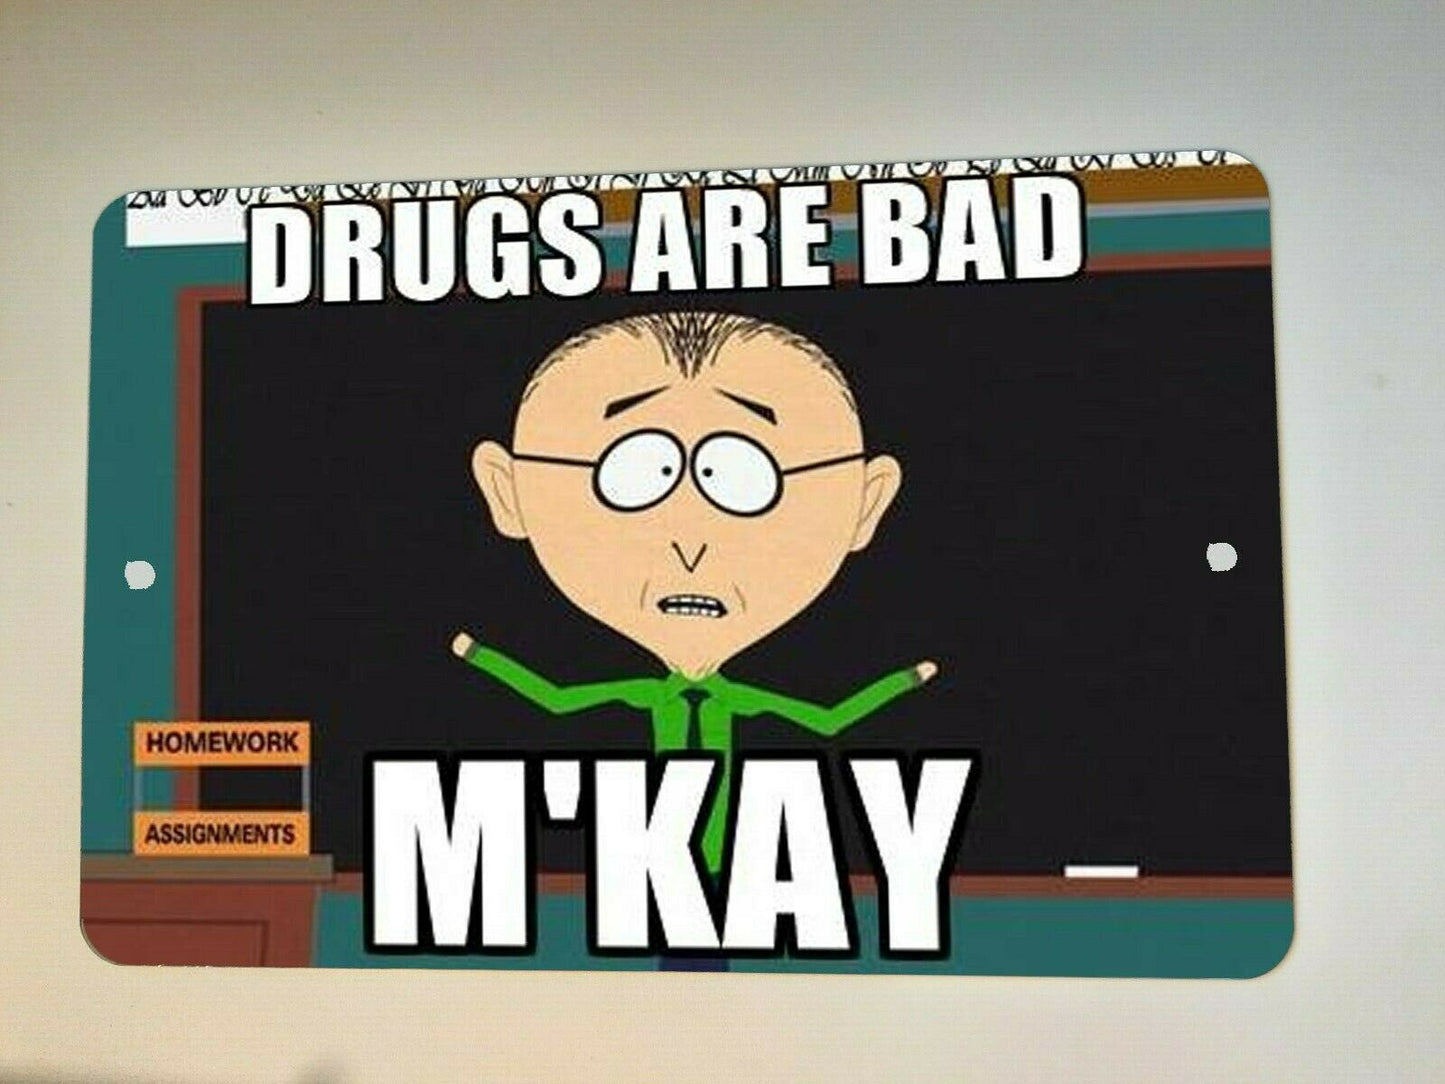 South Park Drugs Are Bad M'Kay 8x12 Metal Wall Sign Mr. Mackey